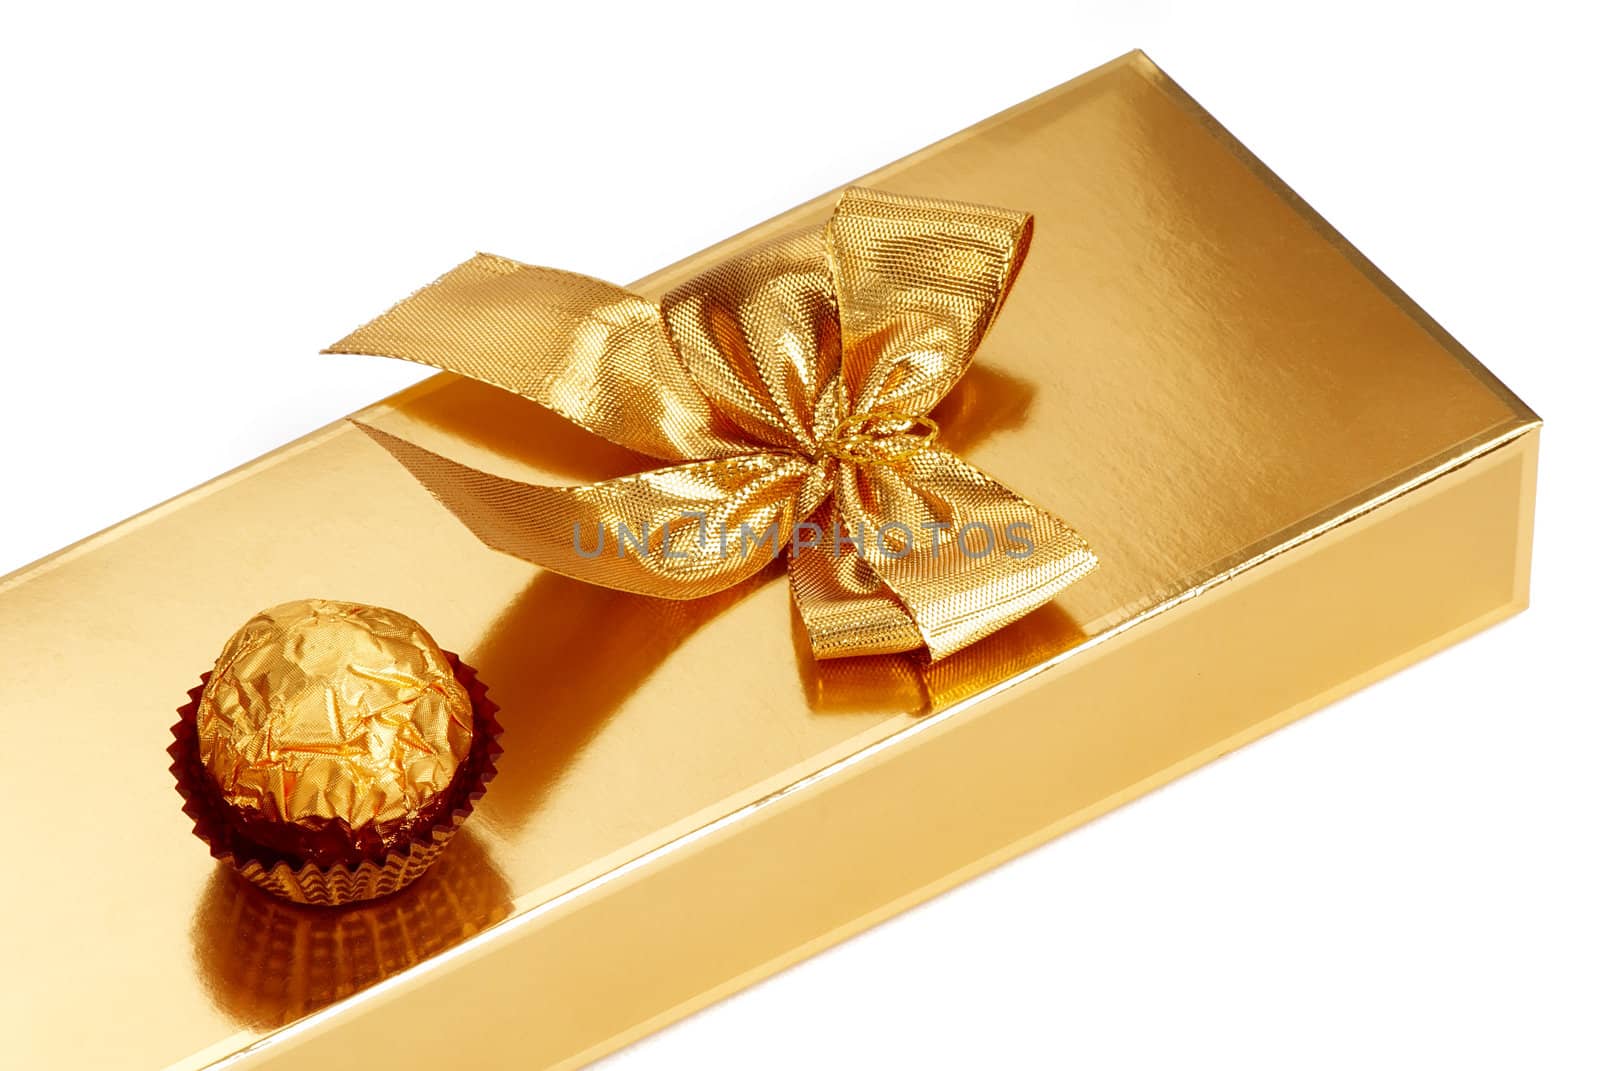 A gold boxed gift with gold ribbon and chocolate.